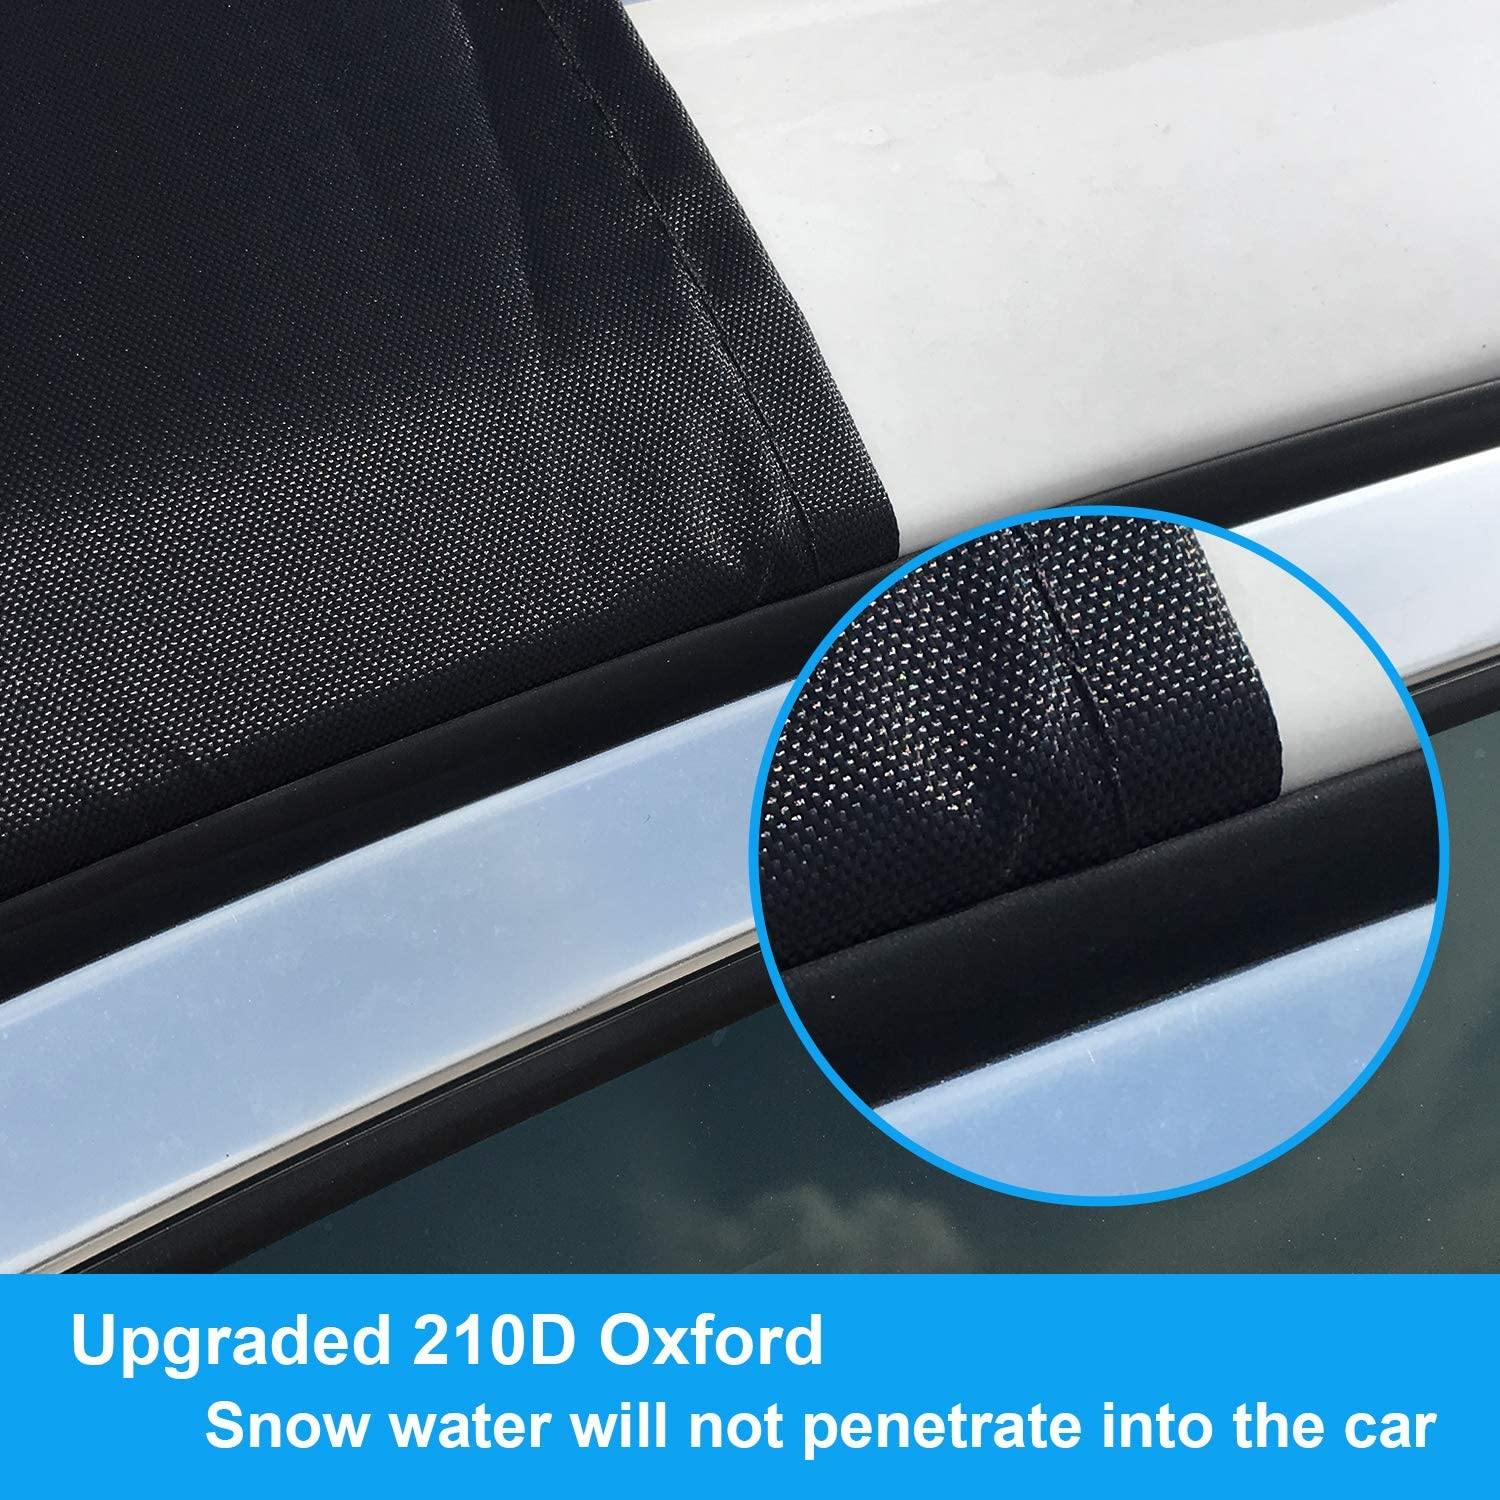 Windshield Snow & Ice Cover, Waterproof, Sun Protection for All Cars with Magnetic (47" × 82") - KinglyDay